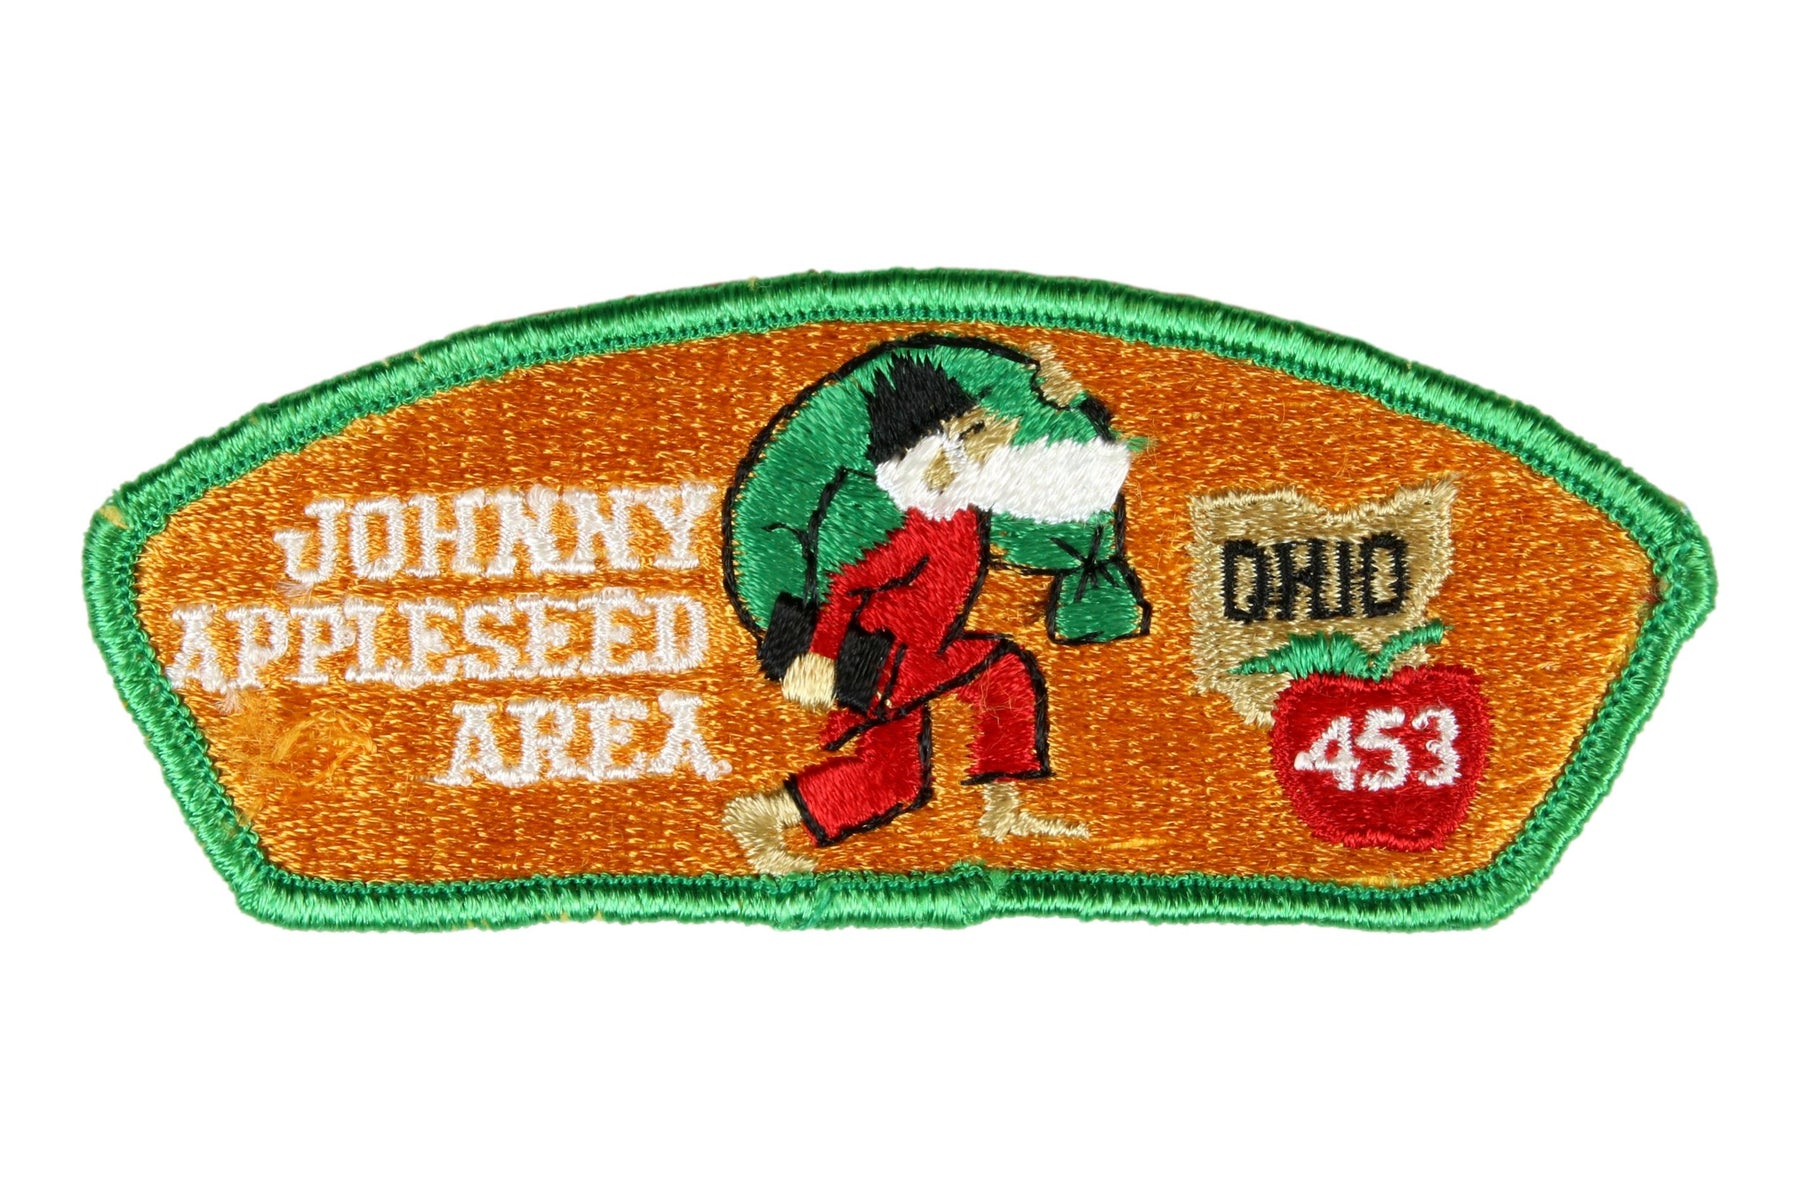 Johnny Appleseed Area CSP S-2